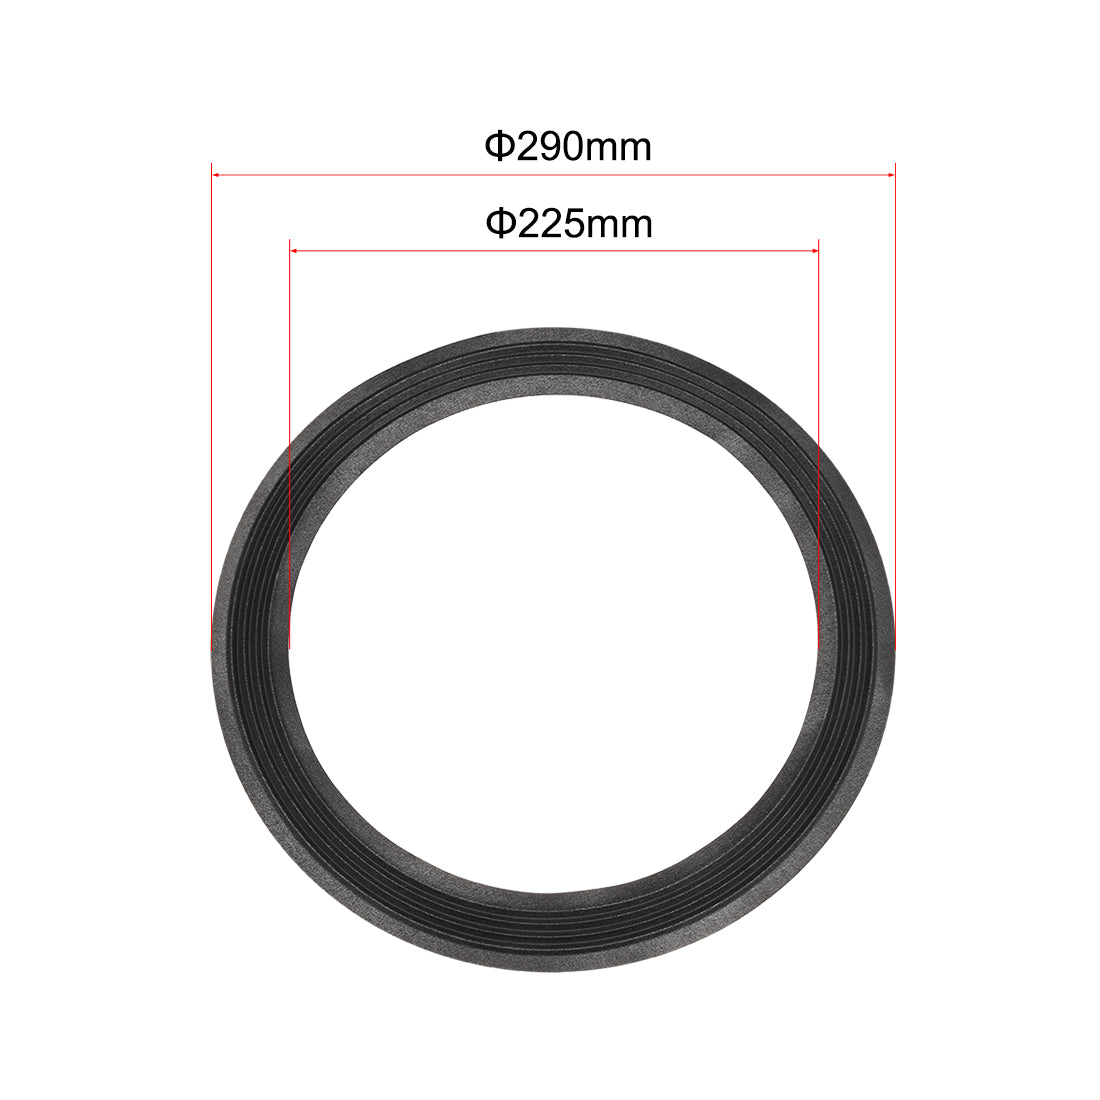 uxcell Uxcell 12 inch Speaker Cloth Edge Surround Rings Replacement Part for Speaker Repair or DIY